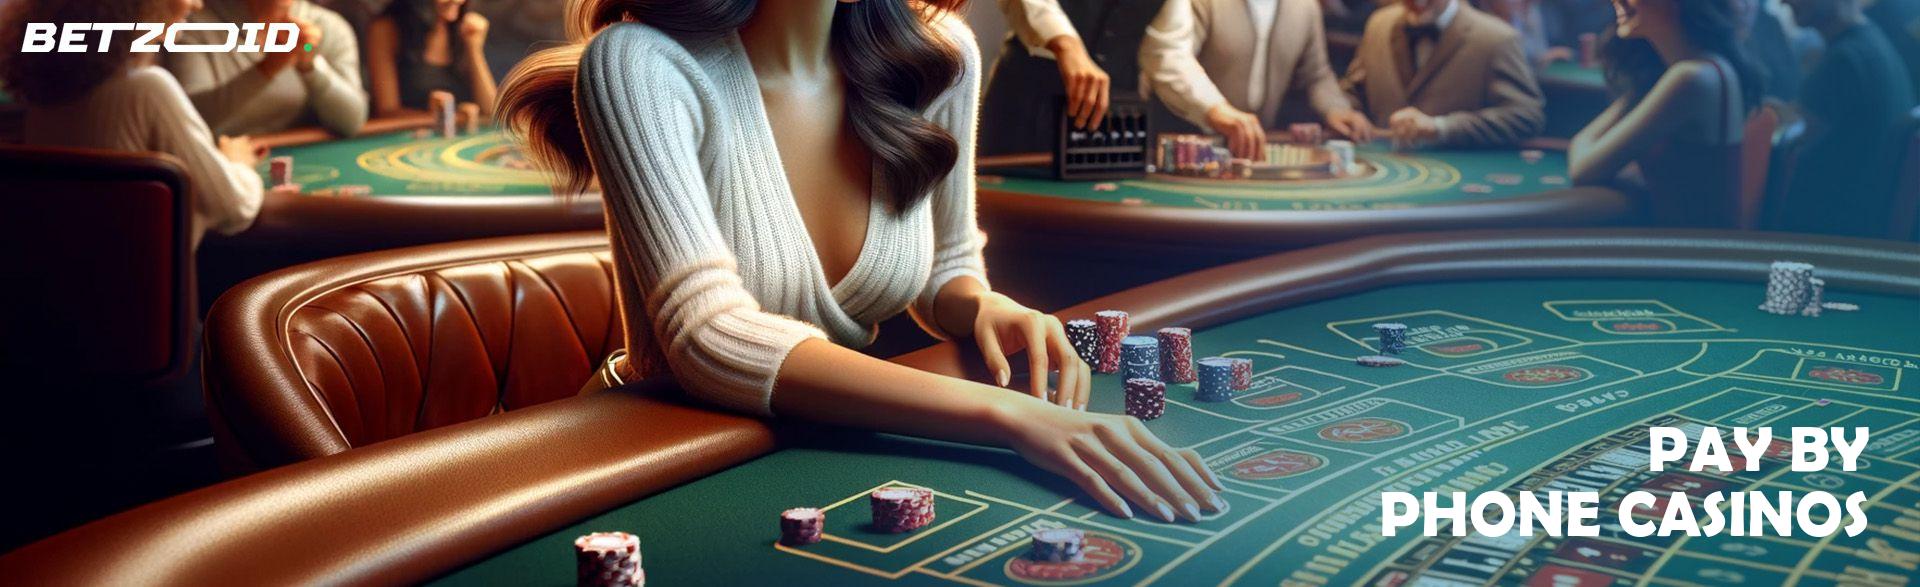 Pay By Phone Casinos.